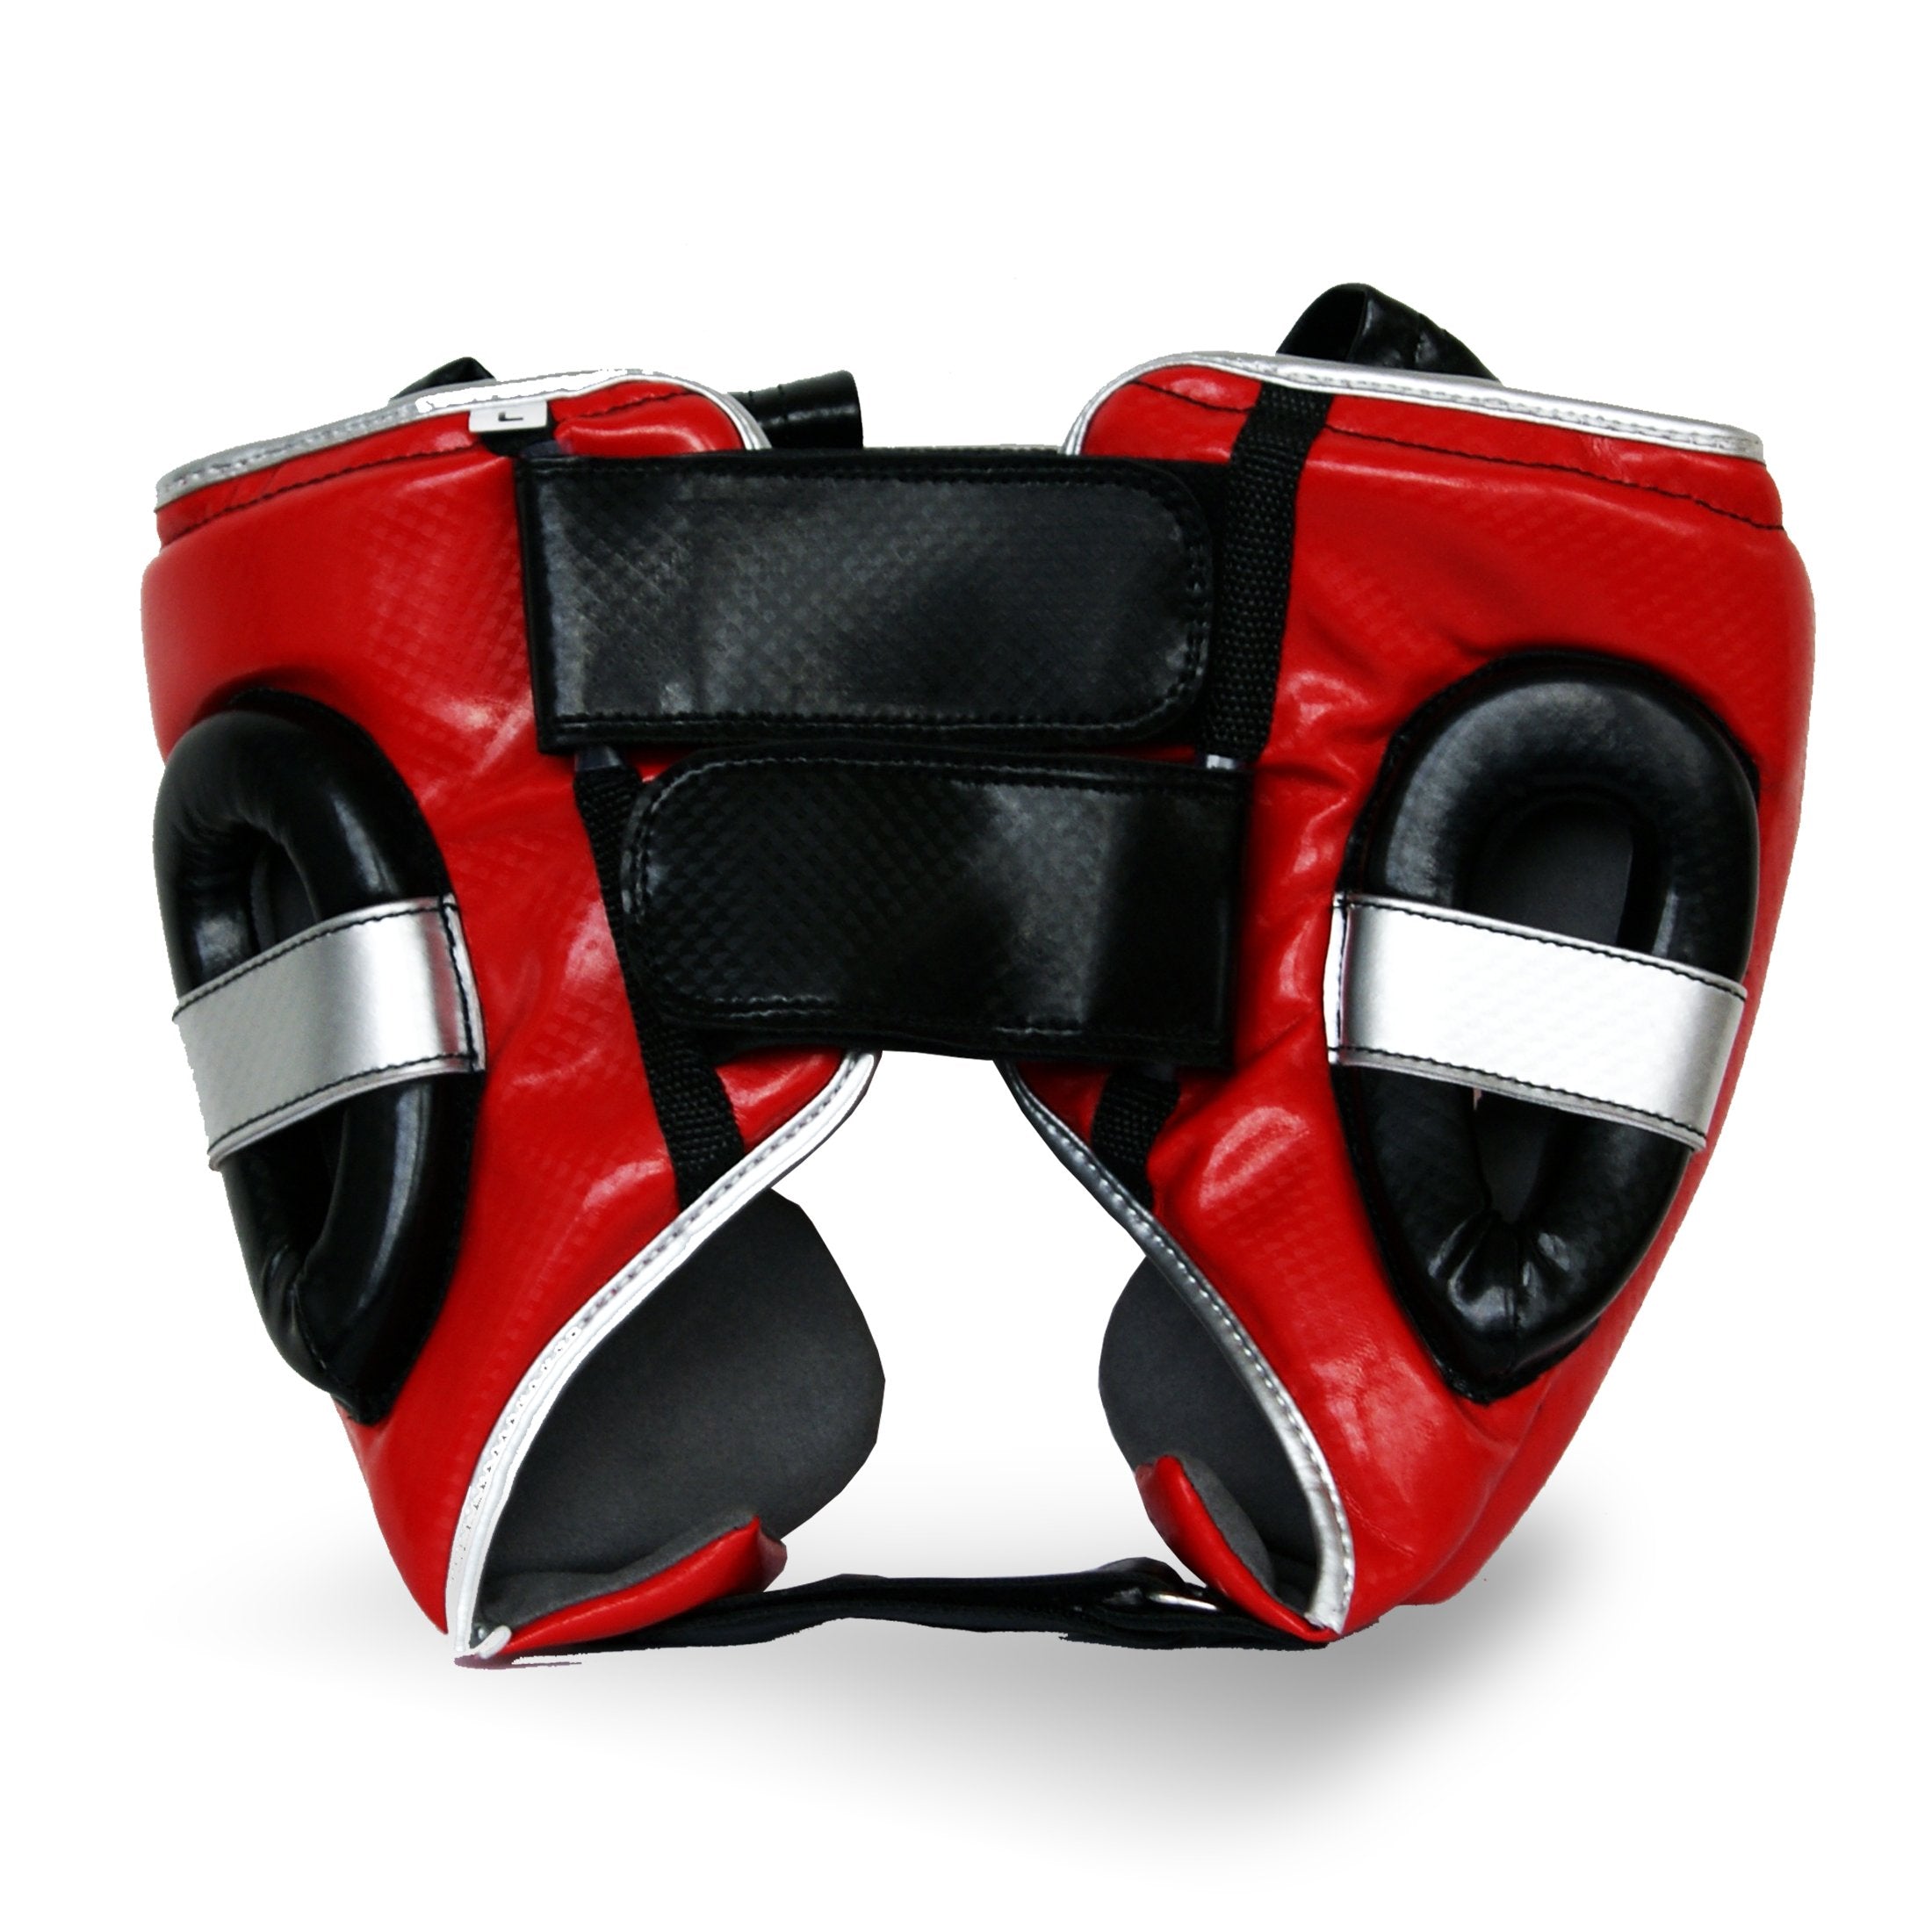 Pro Fitness Head Guard Synthetic Leather Metallic Red / Black / Silver